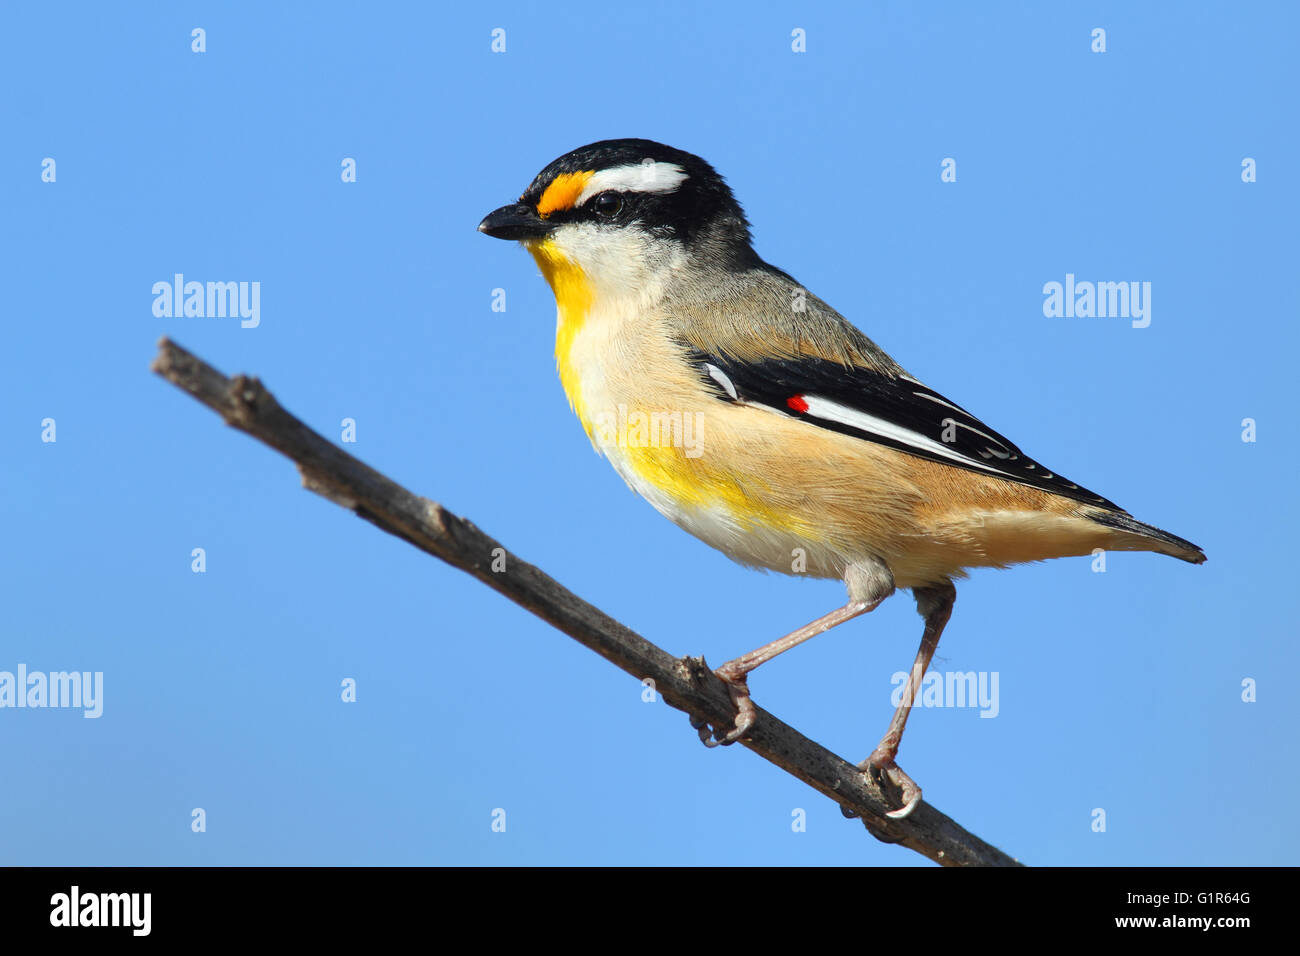 Striated Pardalote, Pardalotus striatus, sitting on a branch with a blue sky background.   Photo Chris Ison / Wildshot Images. Stock Photo